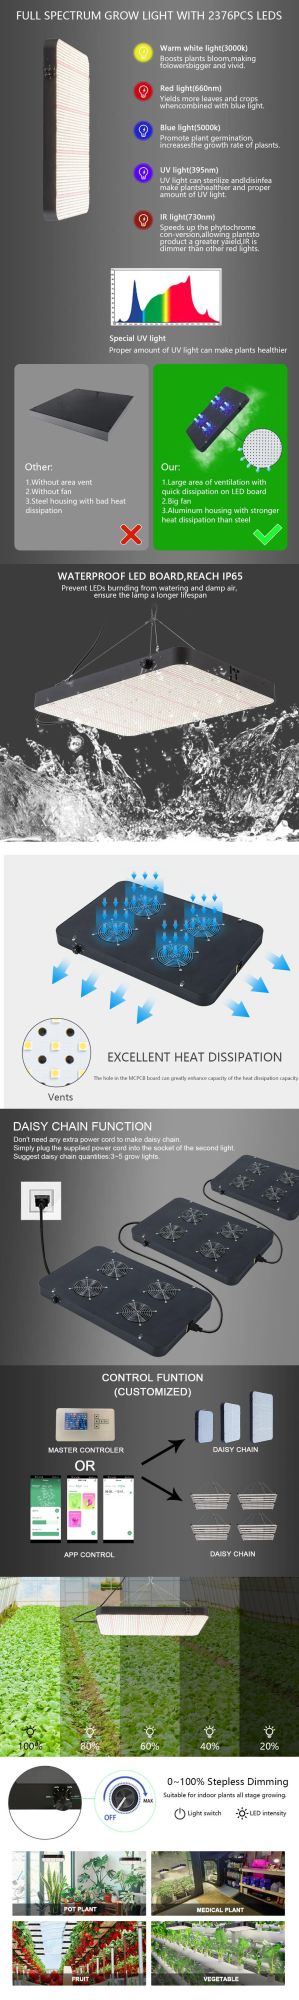 Hot-Selling Full Spectrum Waterproof LED Board Actual Power 1000W FCC Certification Horticulture, Medical Plant Ready to Ship LED Grow Light for USA